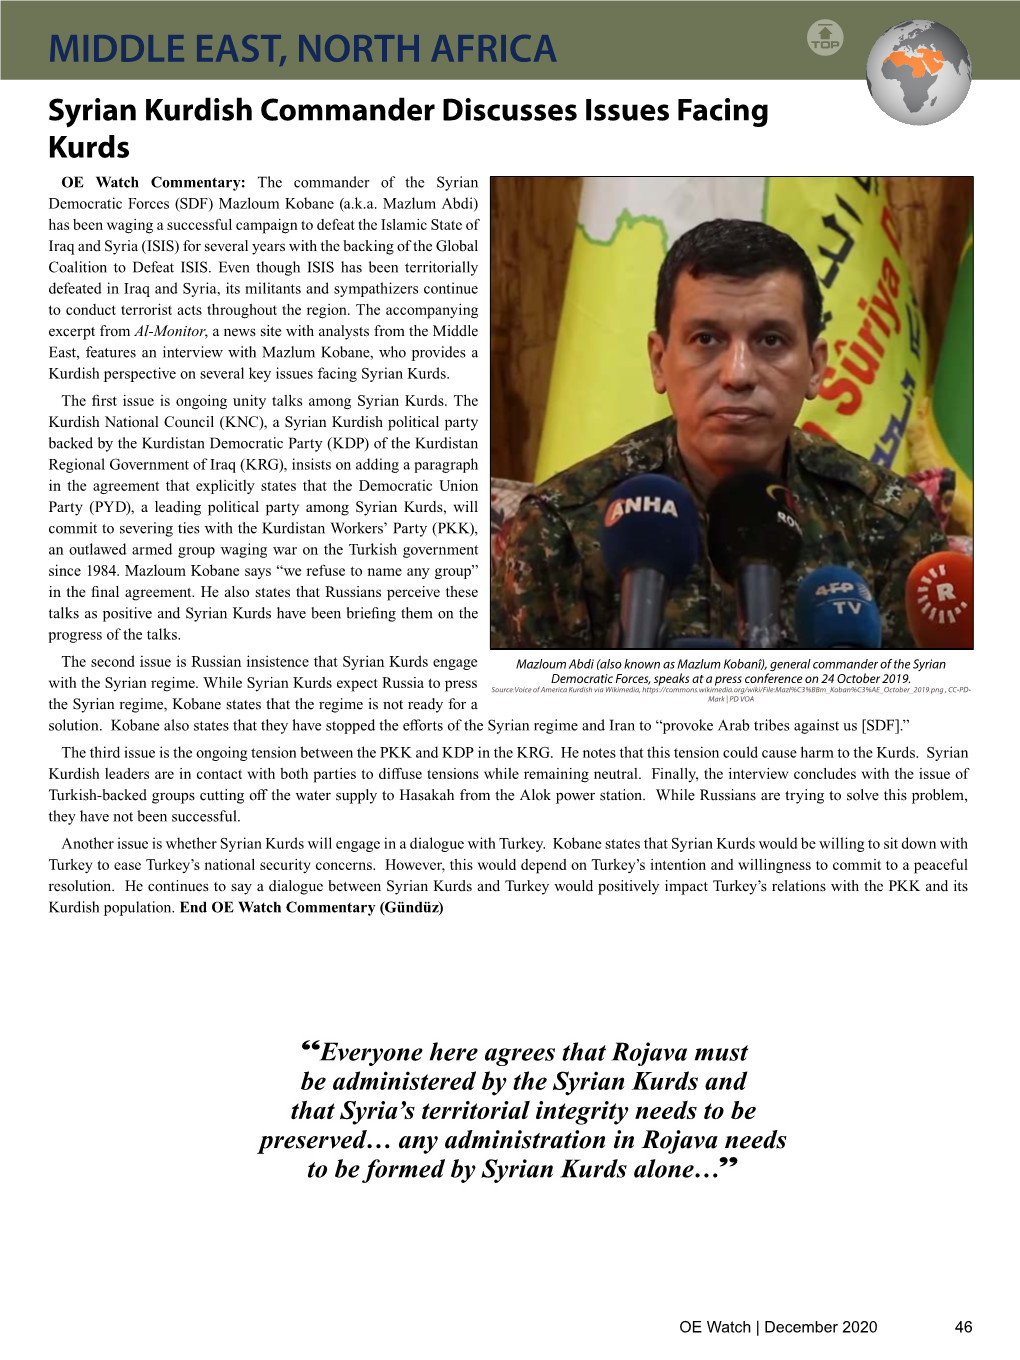 Syrian Kurdish Commander Discusses Issues Facing Kurds OE Watch Commentary: the Commander of the Syrian Democratic Forces (SDF) Mazloum Kobane (A.K.A